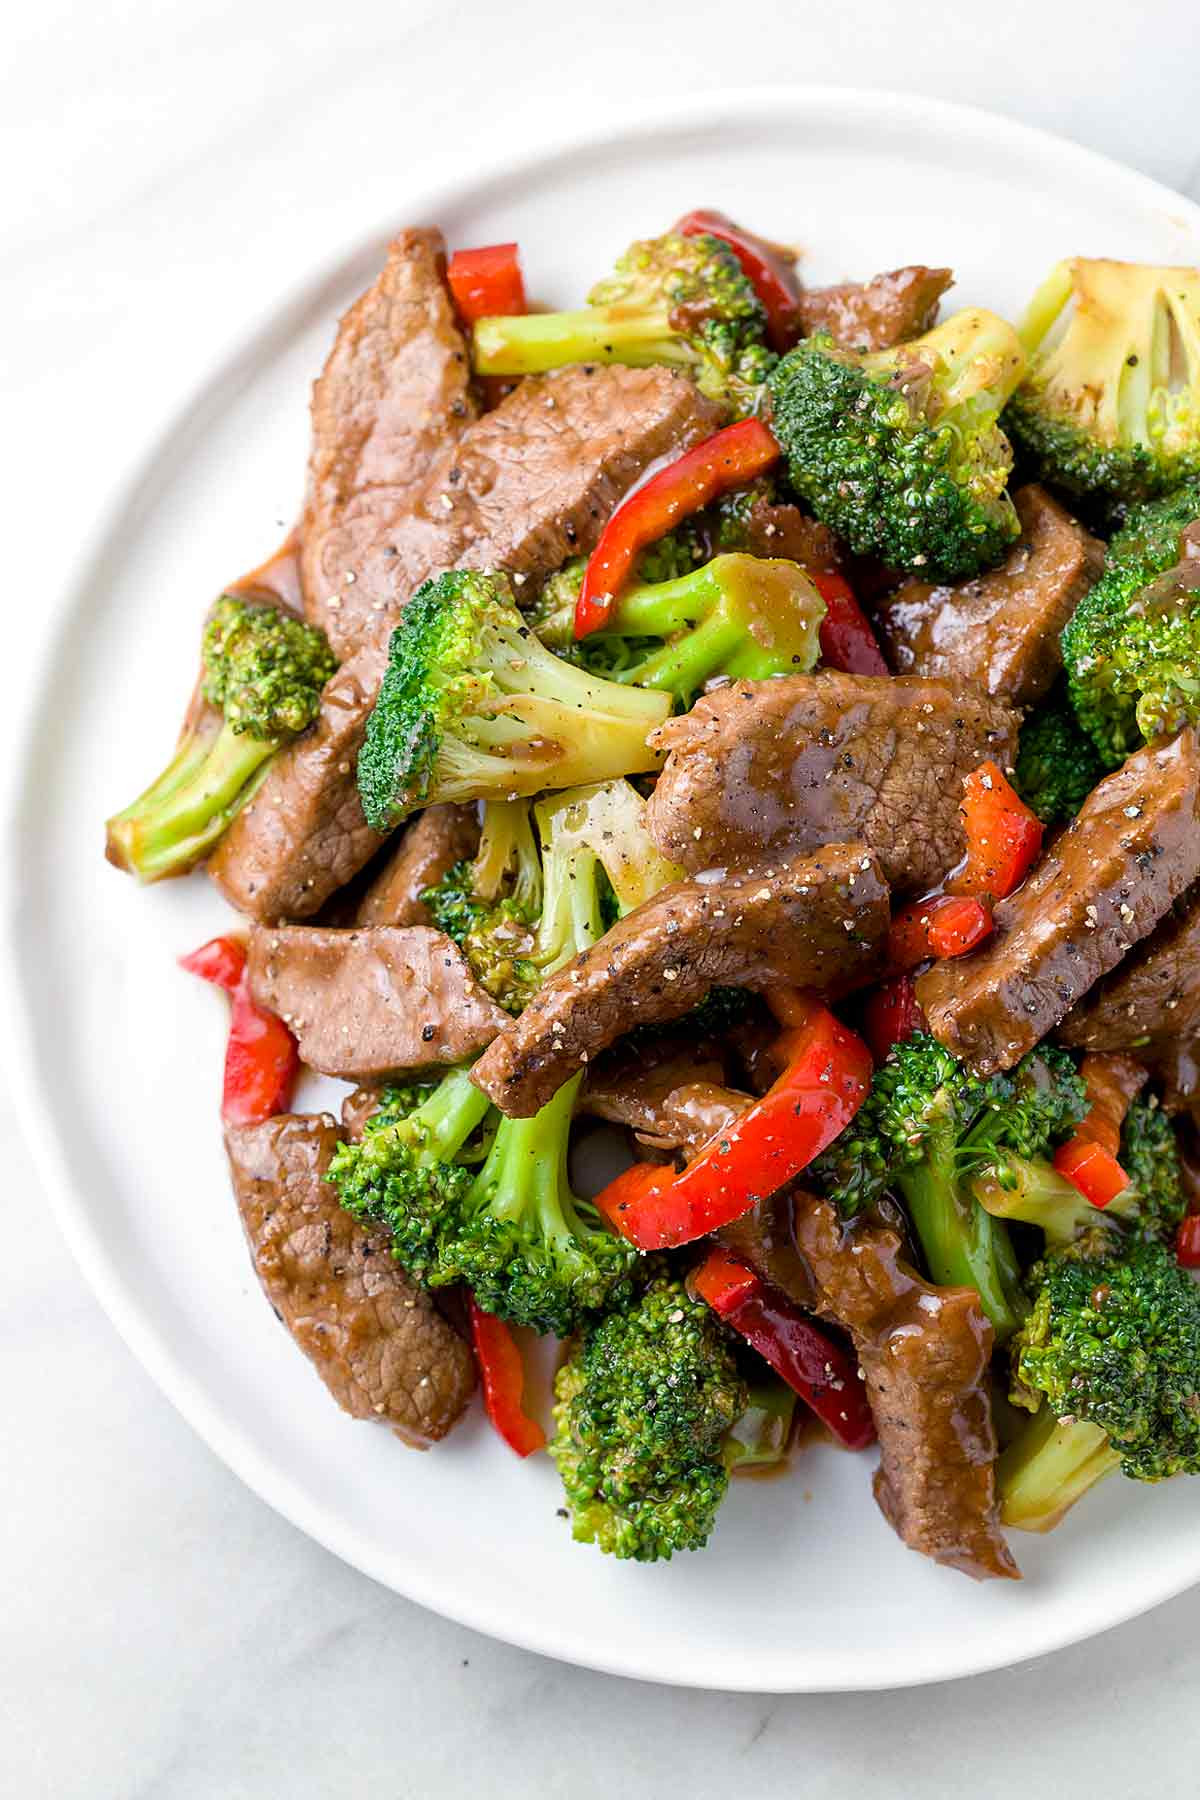 Chinese Beef Recipes Awesome Chinese Beef with Broccoli Stir Fry Recipe Jessica Gavin